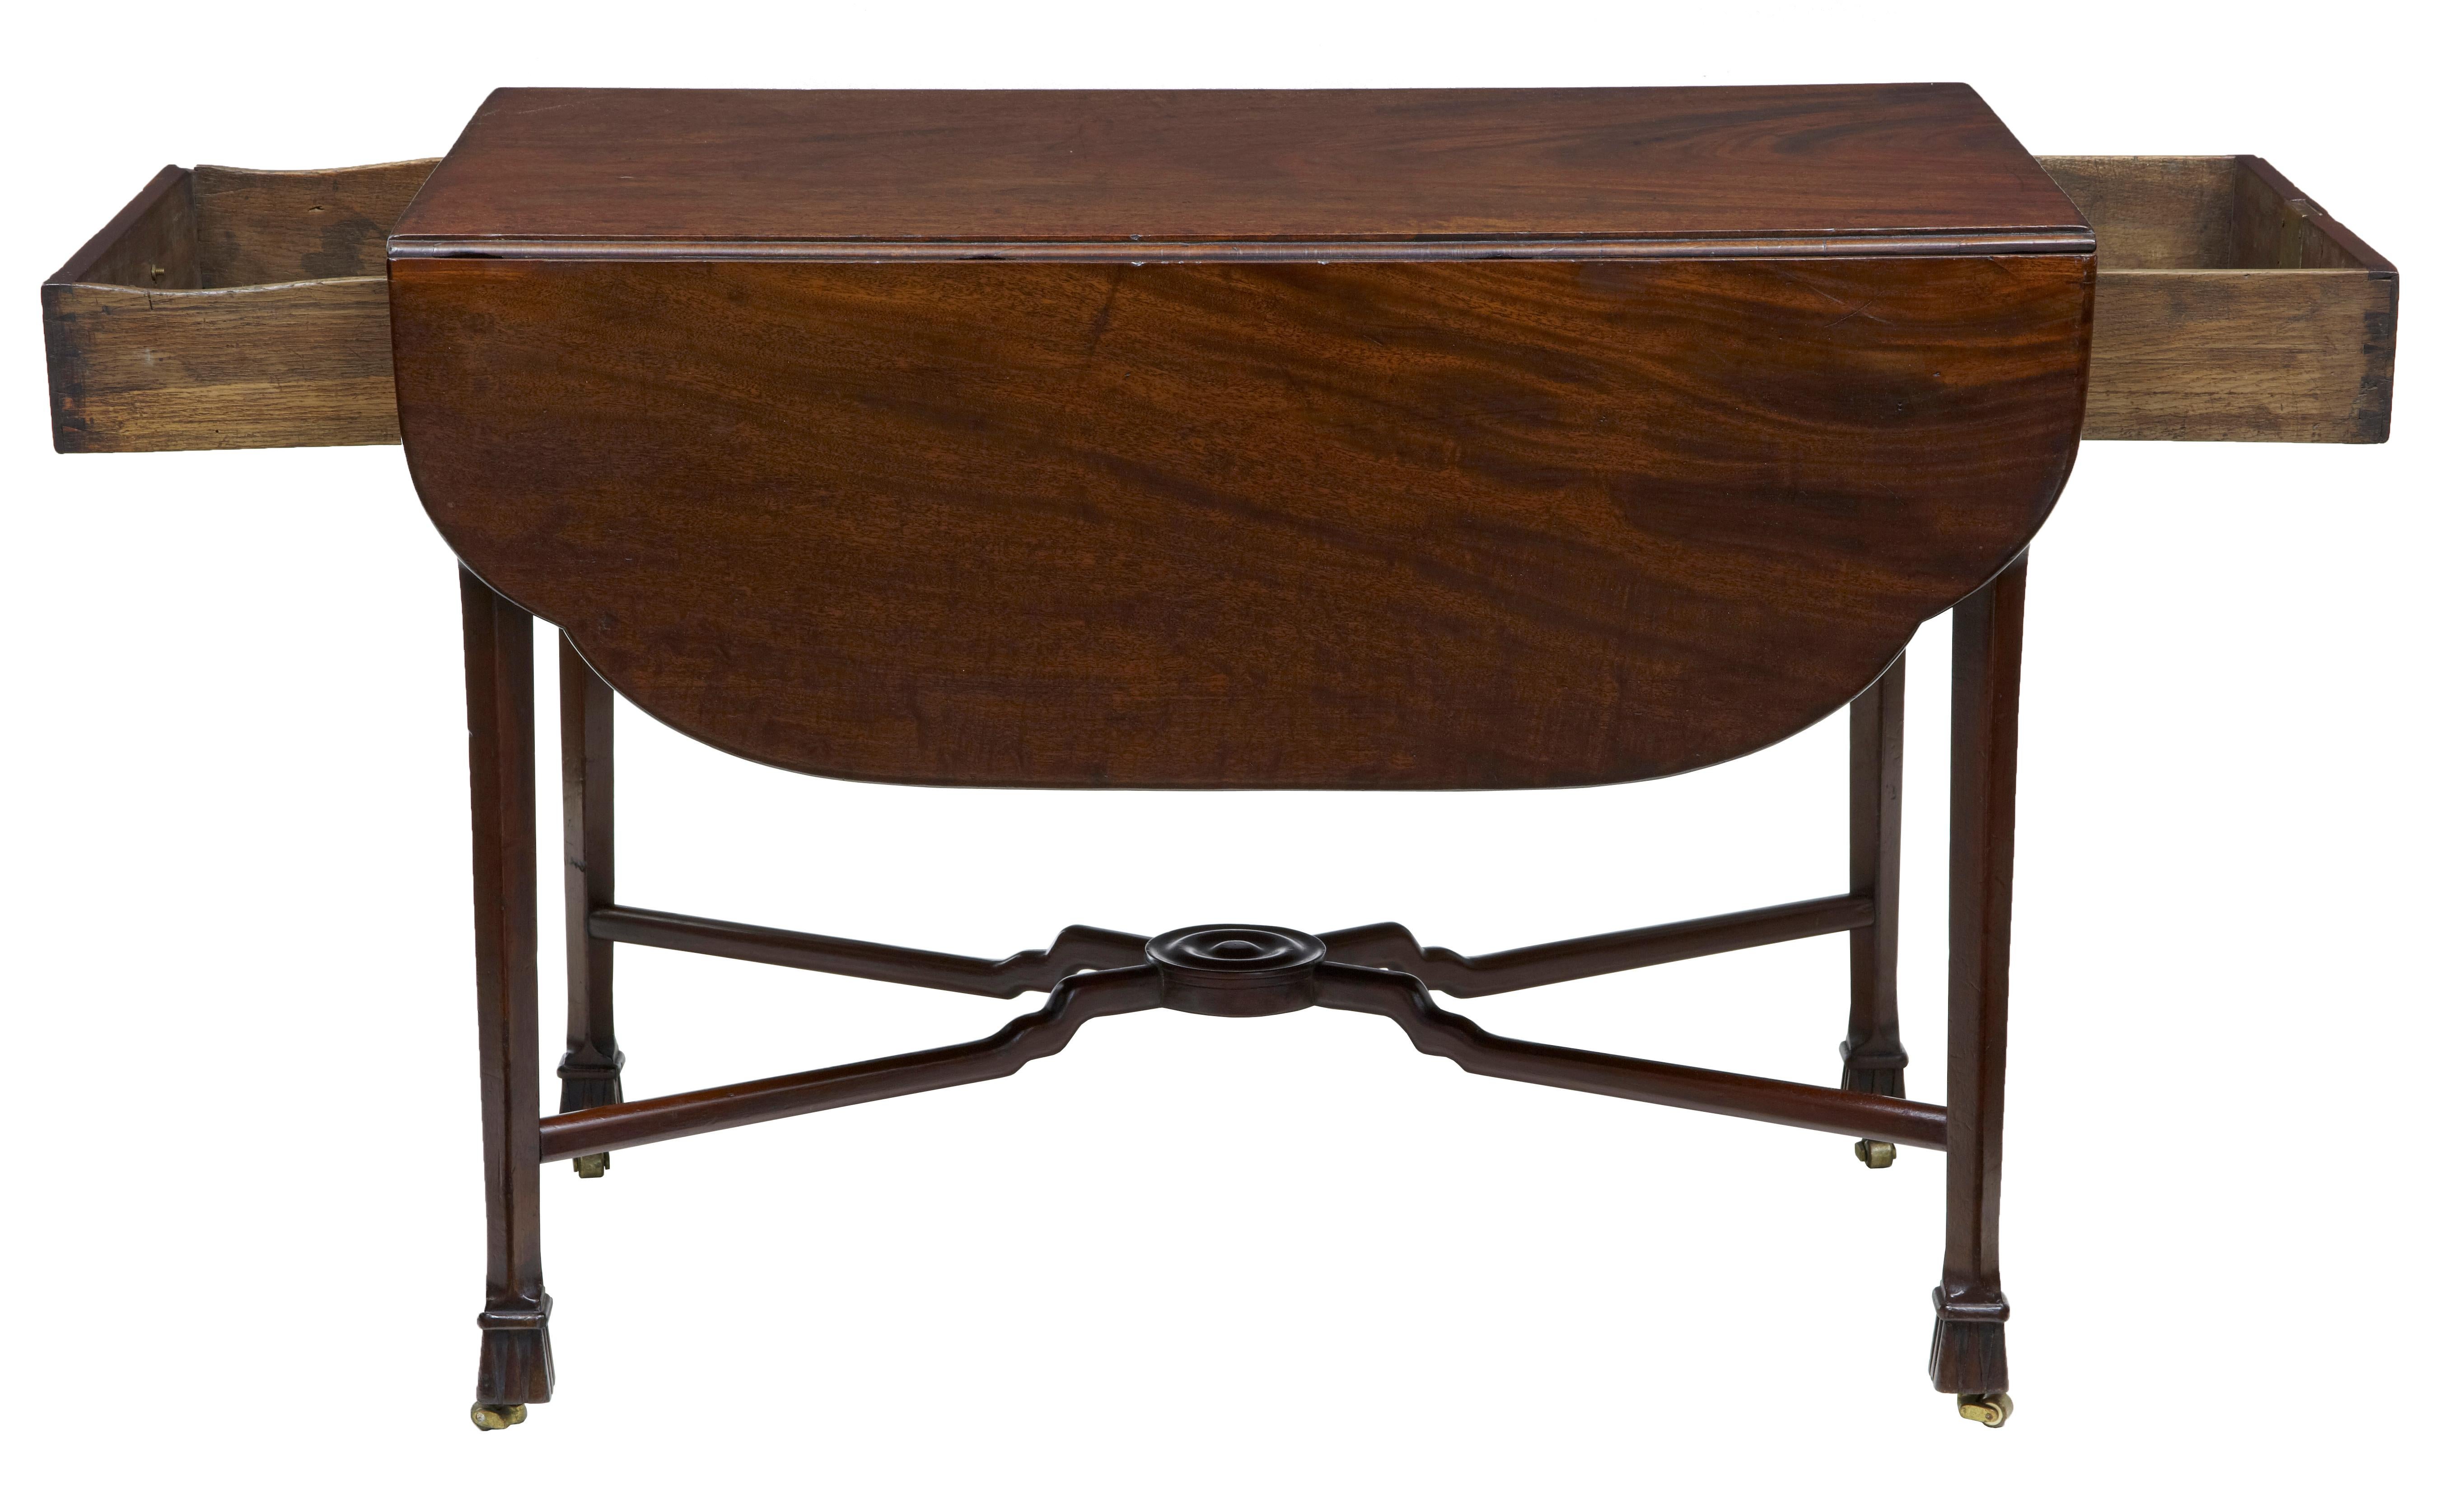 18th century chippendale mahogany pembroke table, circa 1770.

Here present a chippendale period pembroke table made in the finest mahogany.

Shaped drop leaves open to for a flame mahogany top. Drawer fitted with later brass swan neck handle on